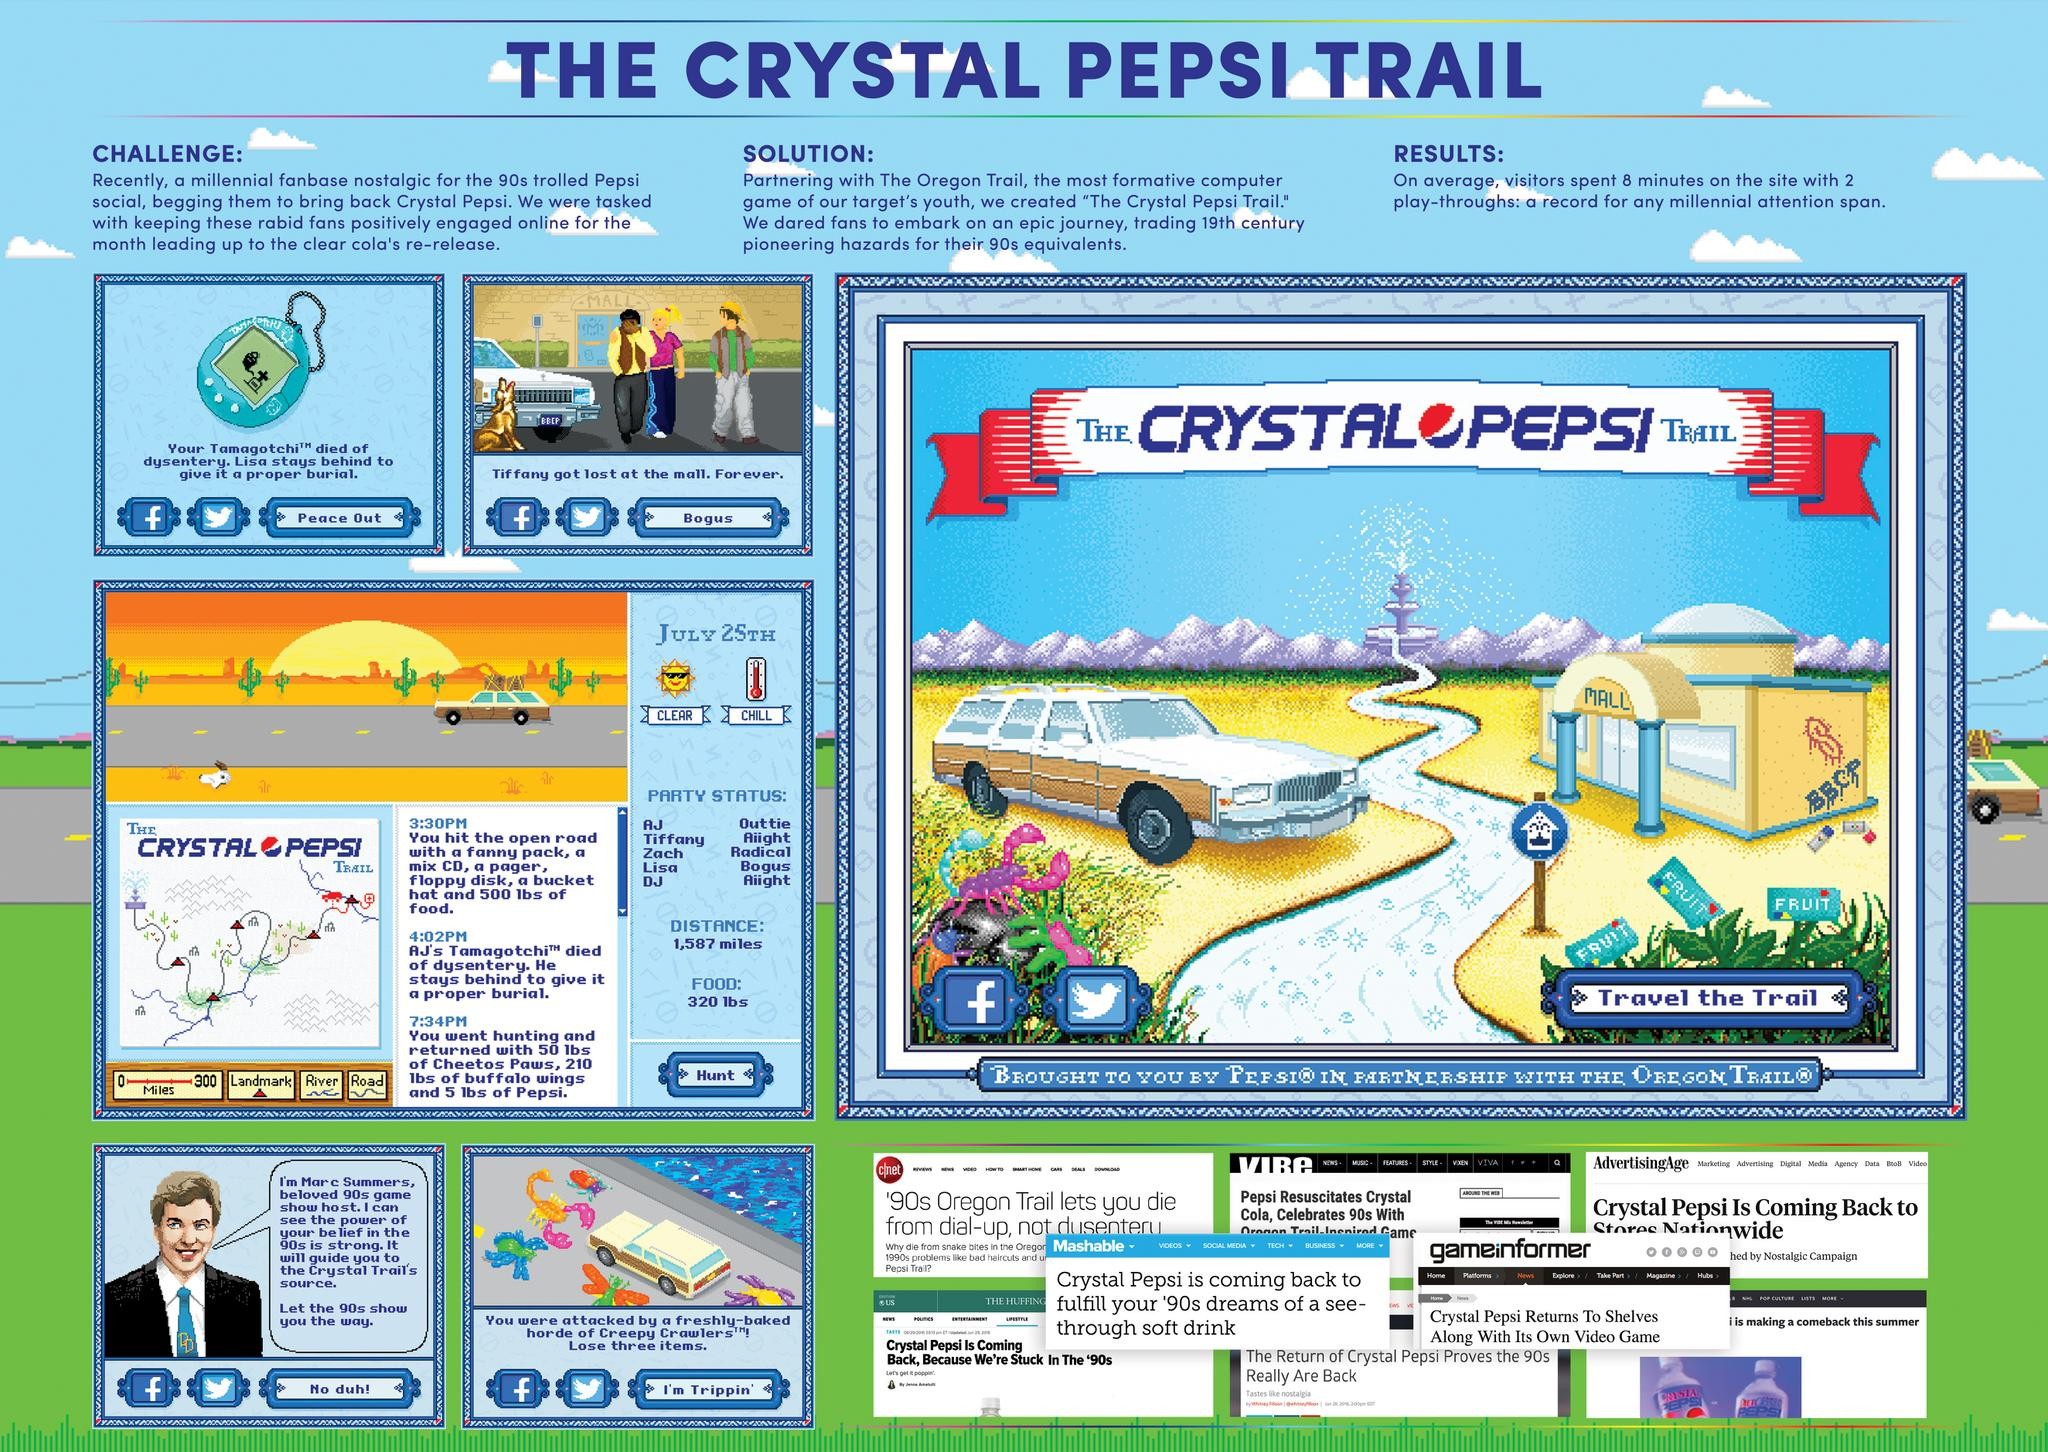 THE CRYSTAL PEPSI TRAIL